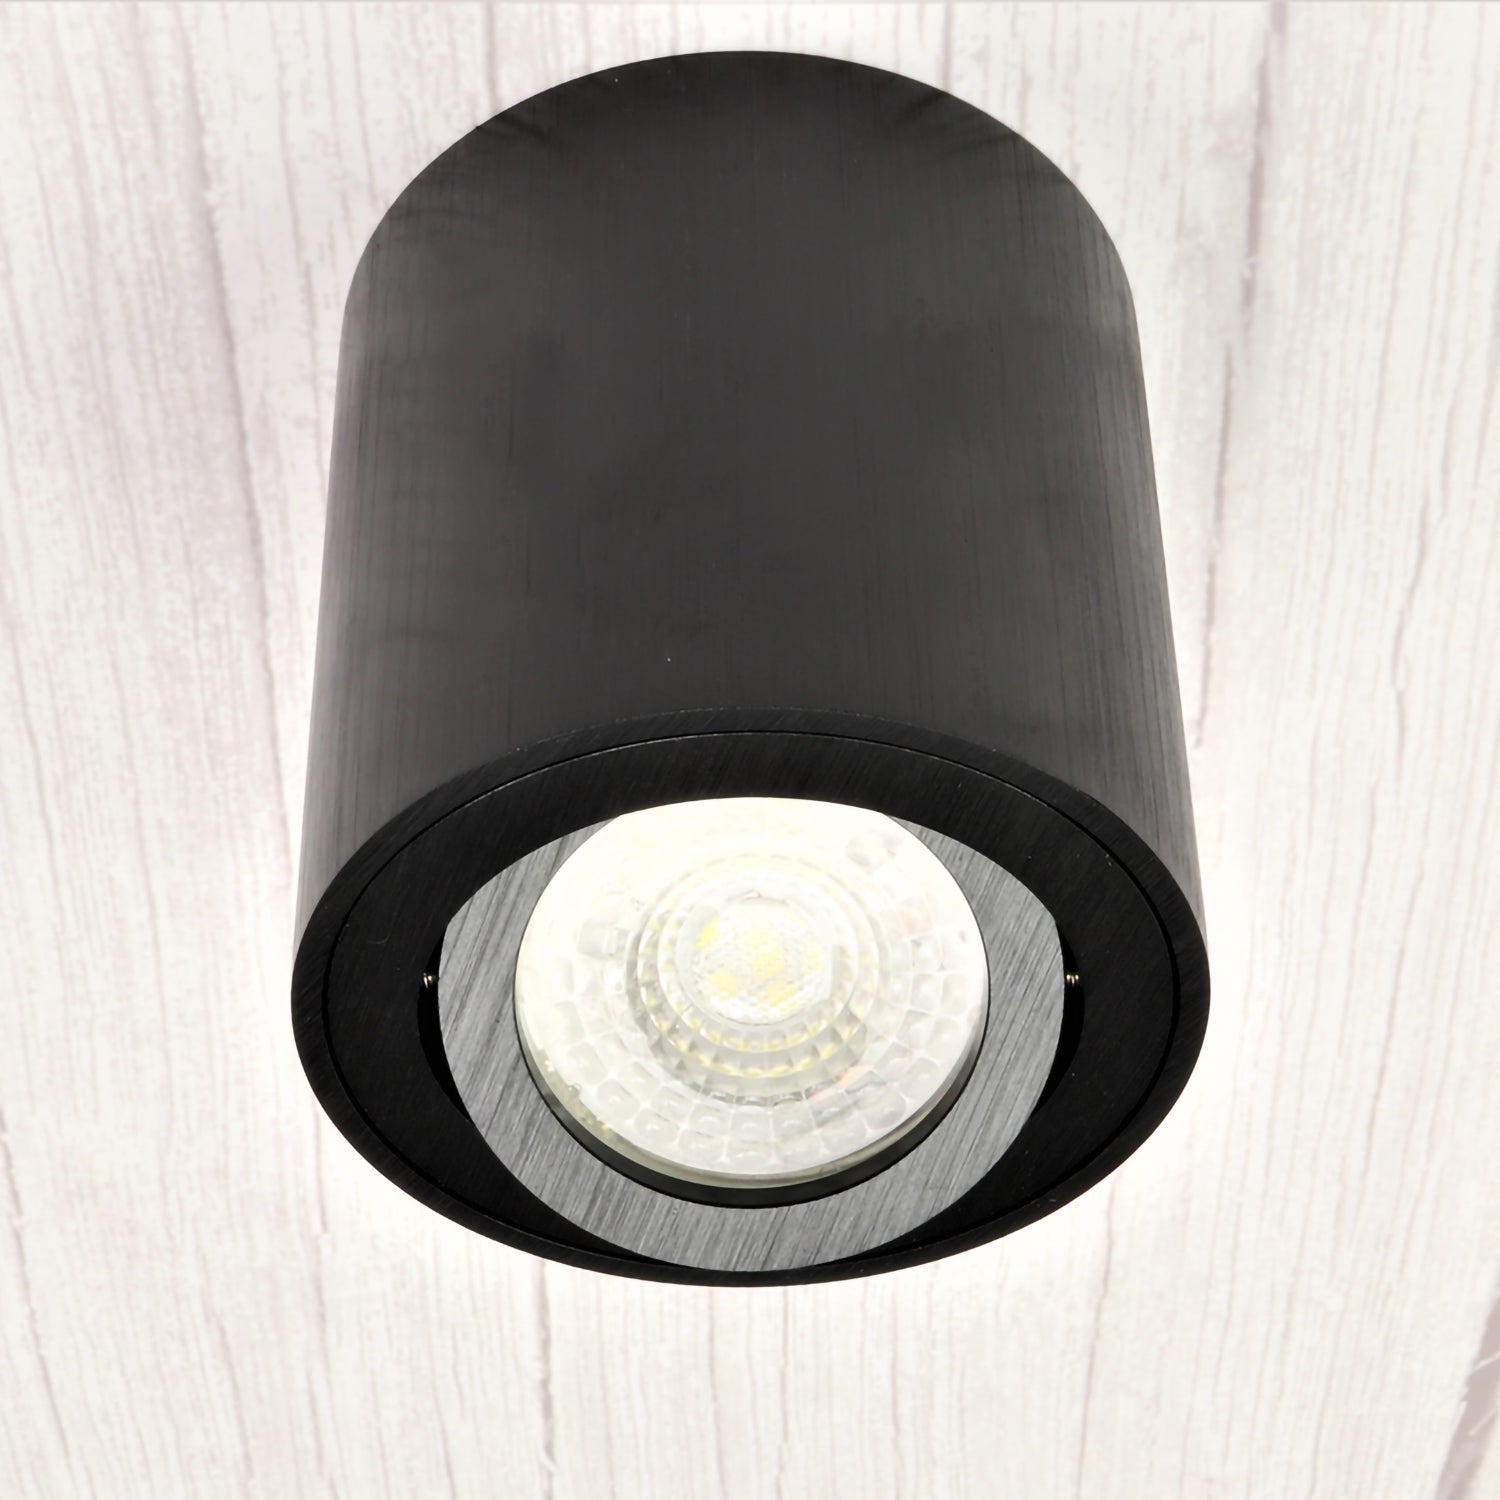 LED surface-mounted spotlight 230V Dimmable Round novoom ceiling 6.2W – Milano light Surface-mounted Black GU10 light